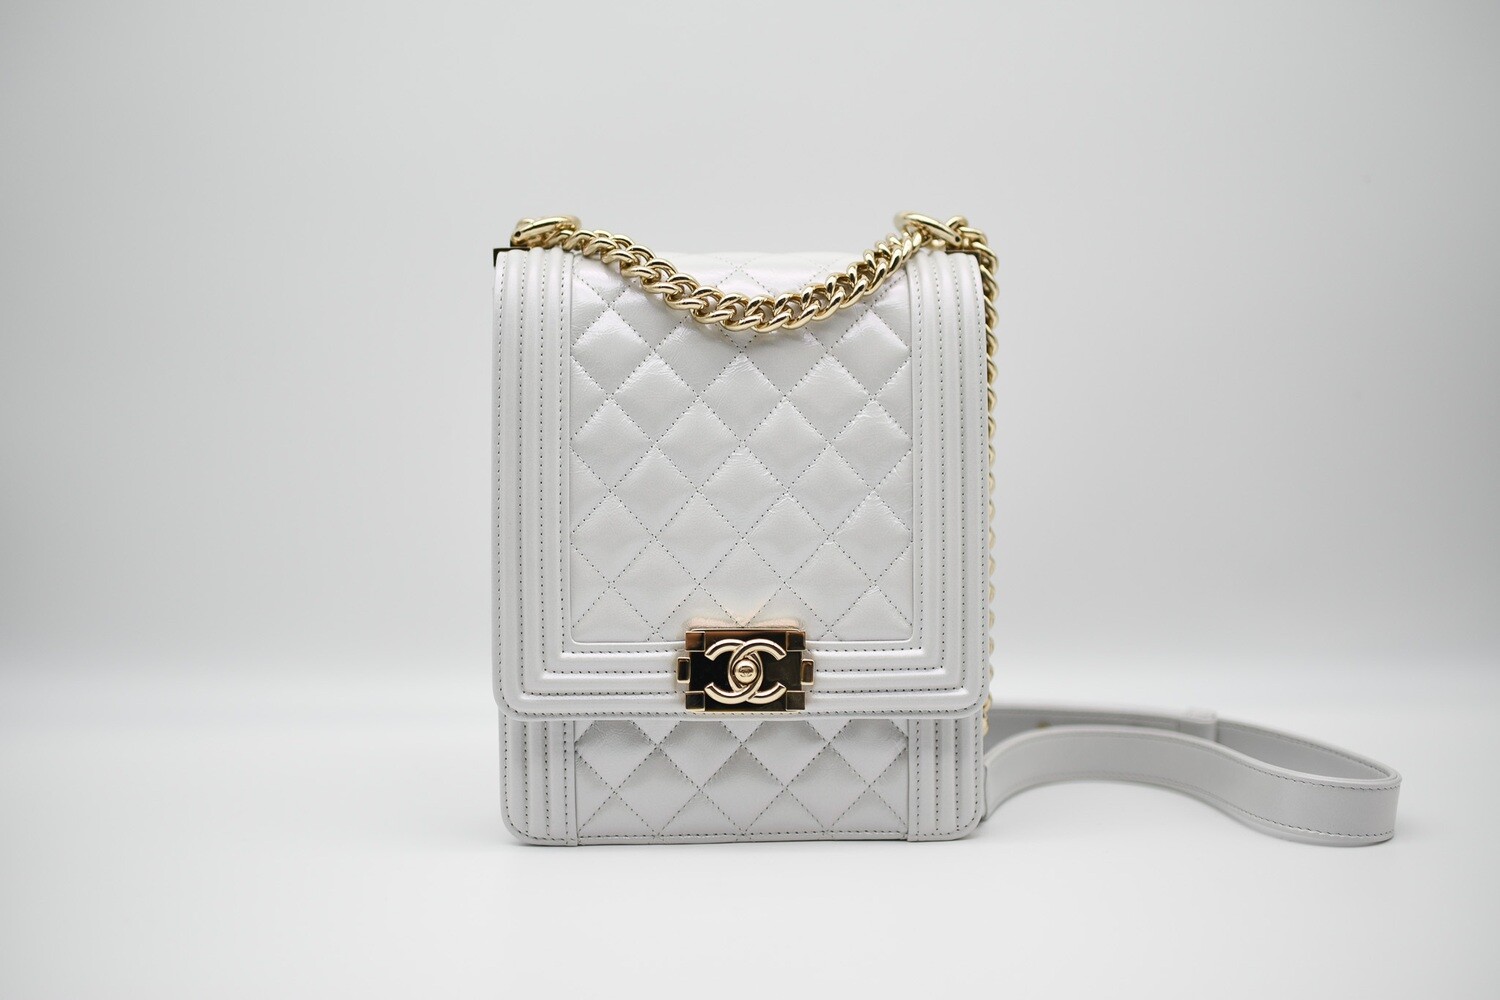 Chanel Boy Bag North South, White Iridescent with Shiny Gold Hardware, Like  New in Box GA006